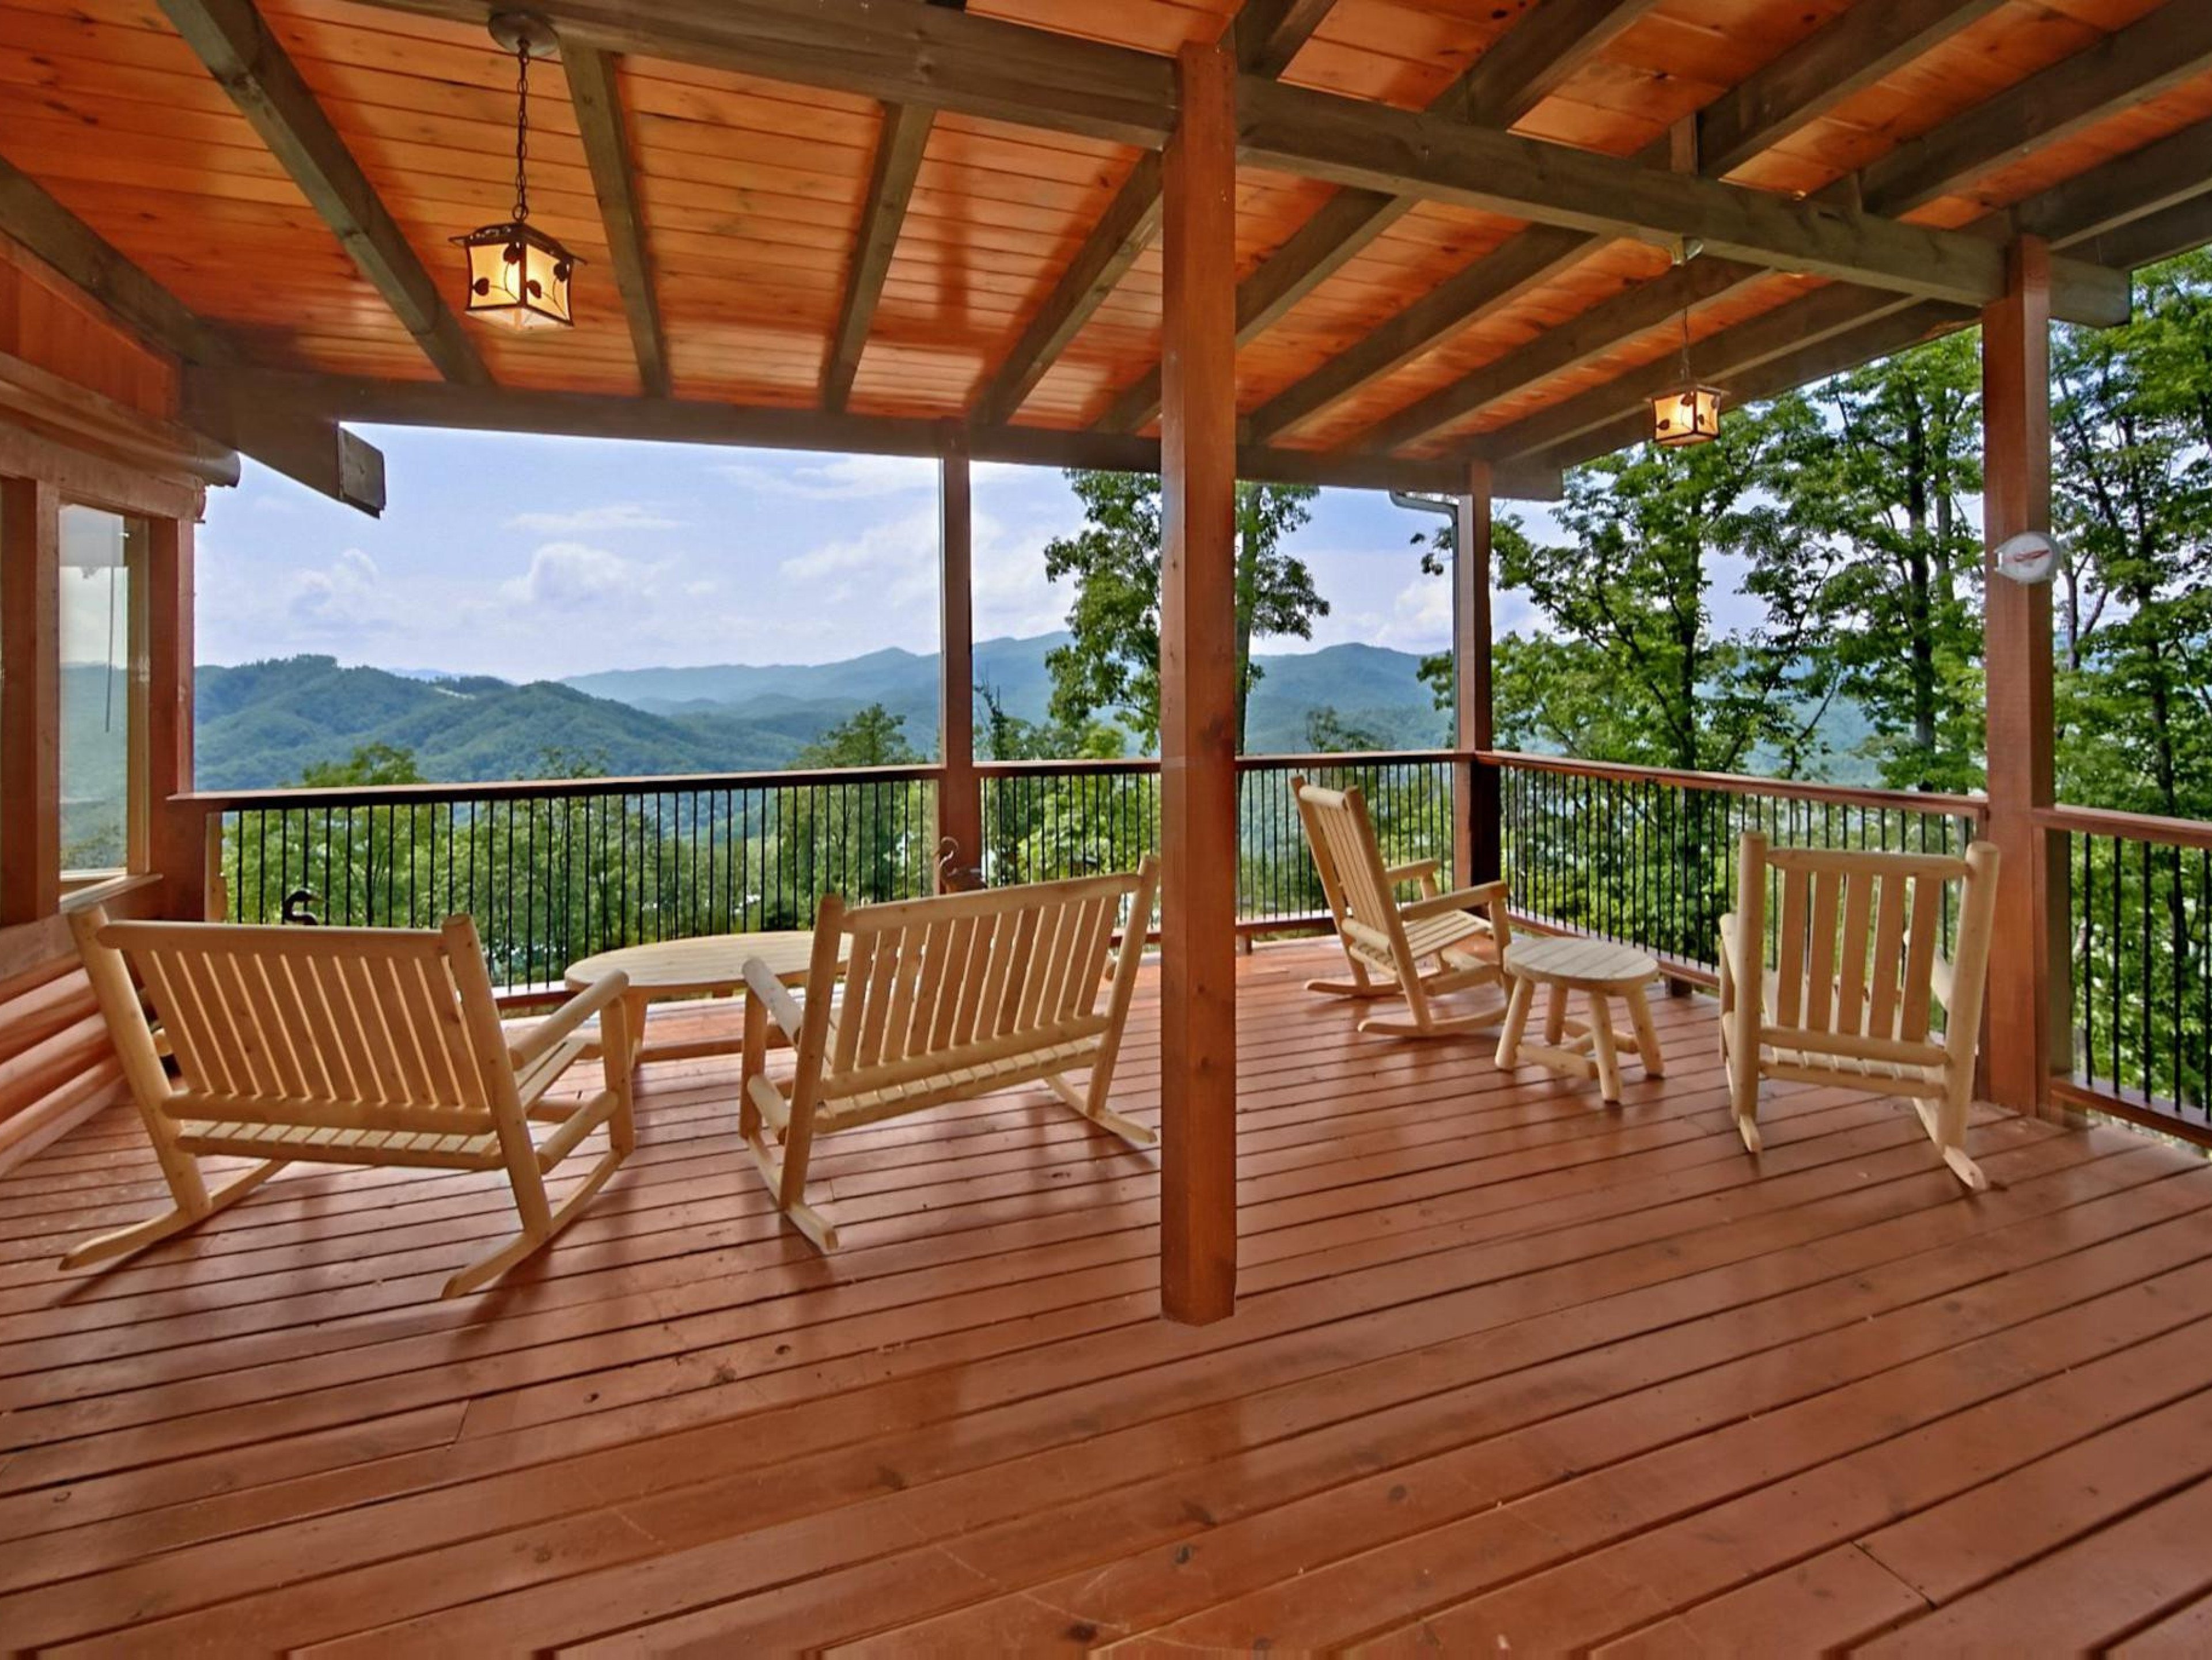 Wears Valley 16 Smoky Mountain cabin rentals with hot tub